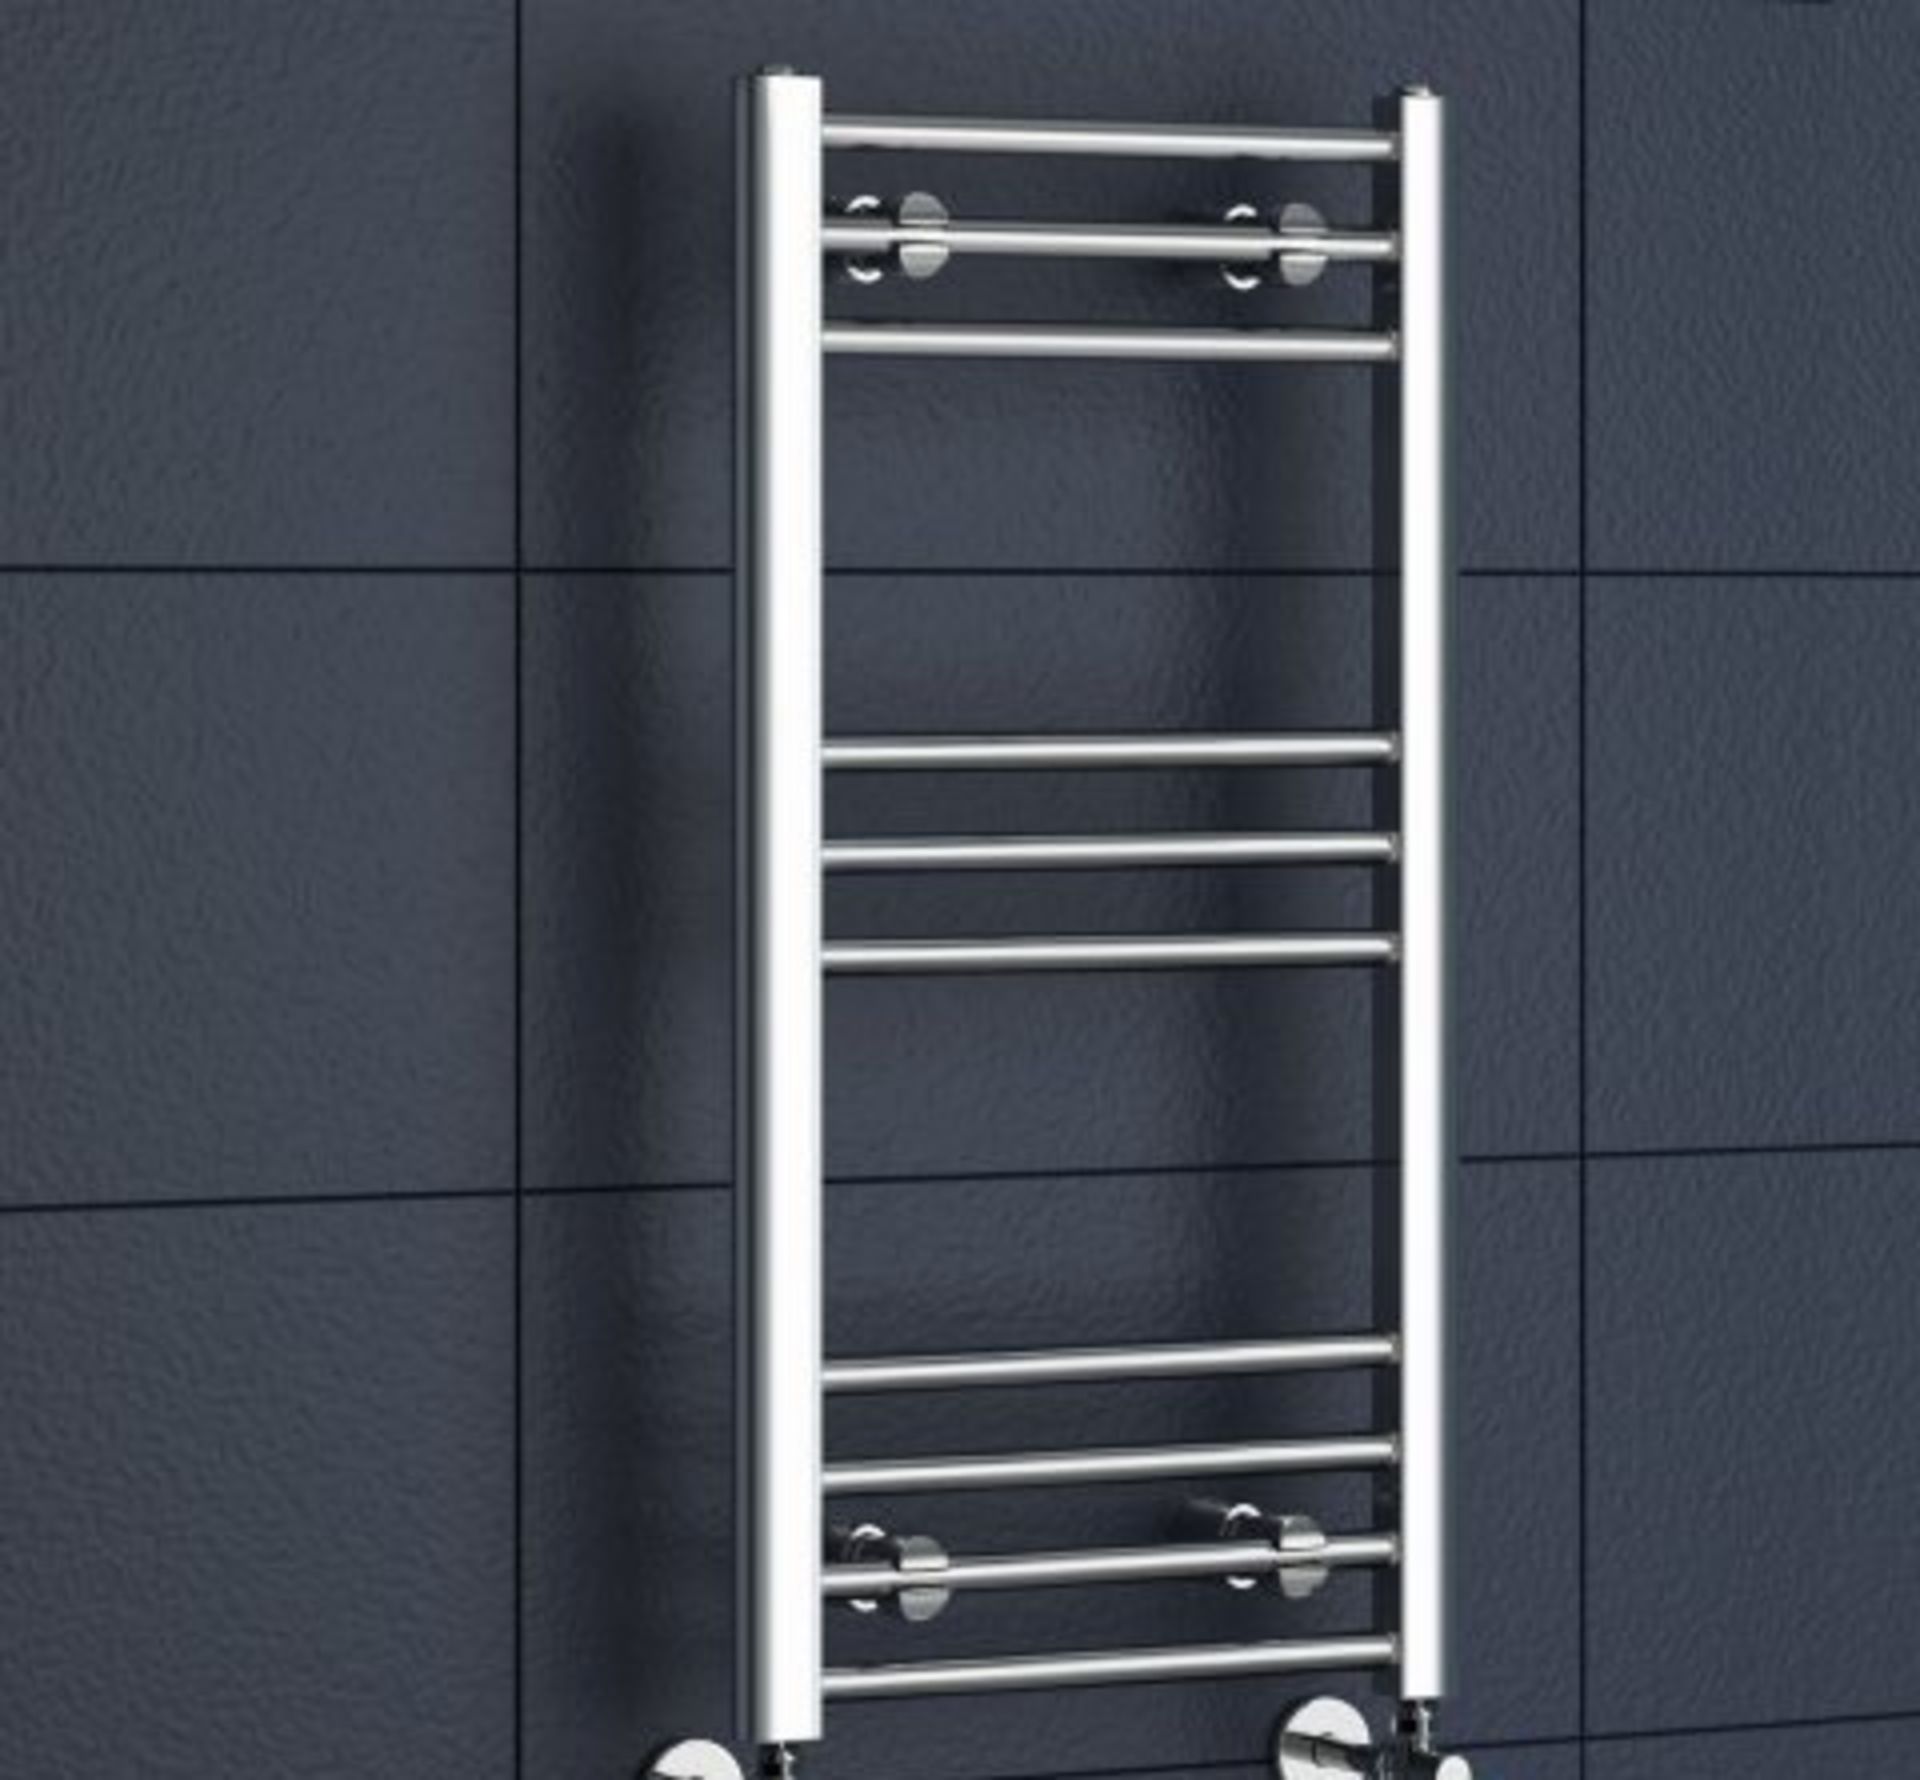 AA127- 1000x600mm White Straight Rail Ladder Towel Radiator - Polar Basic Offering durability and - Image 2 of 7